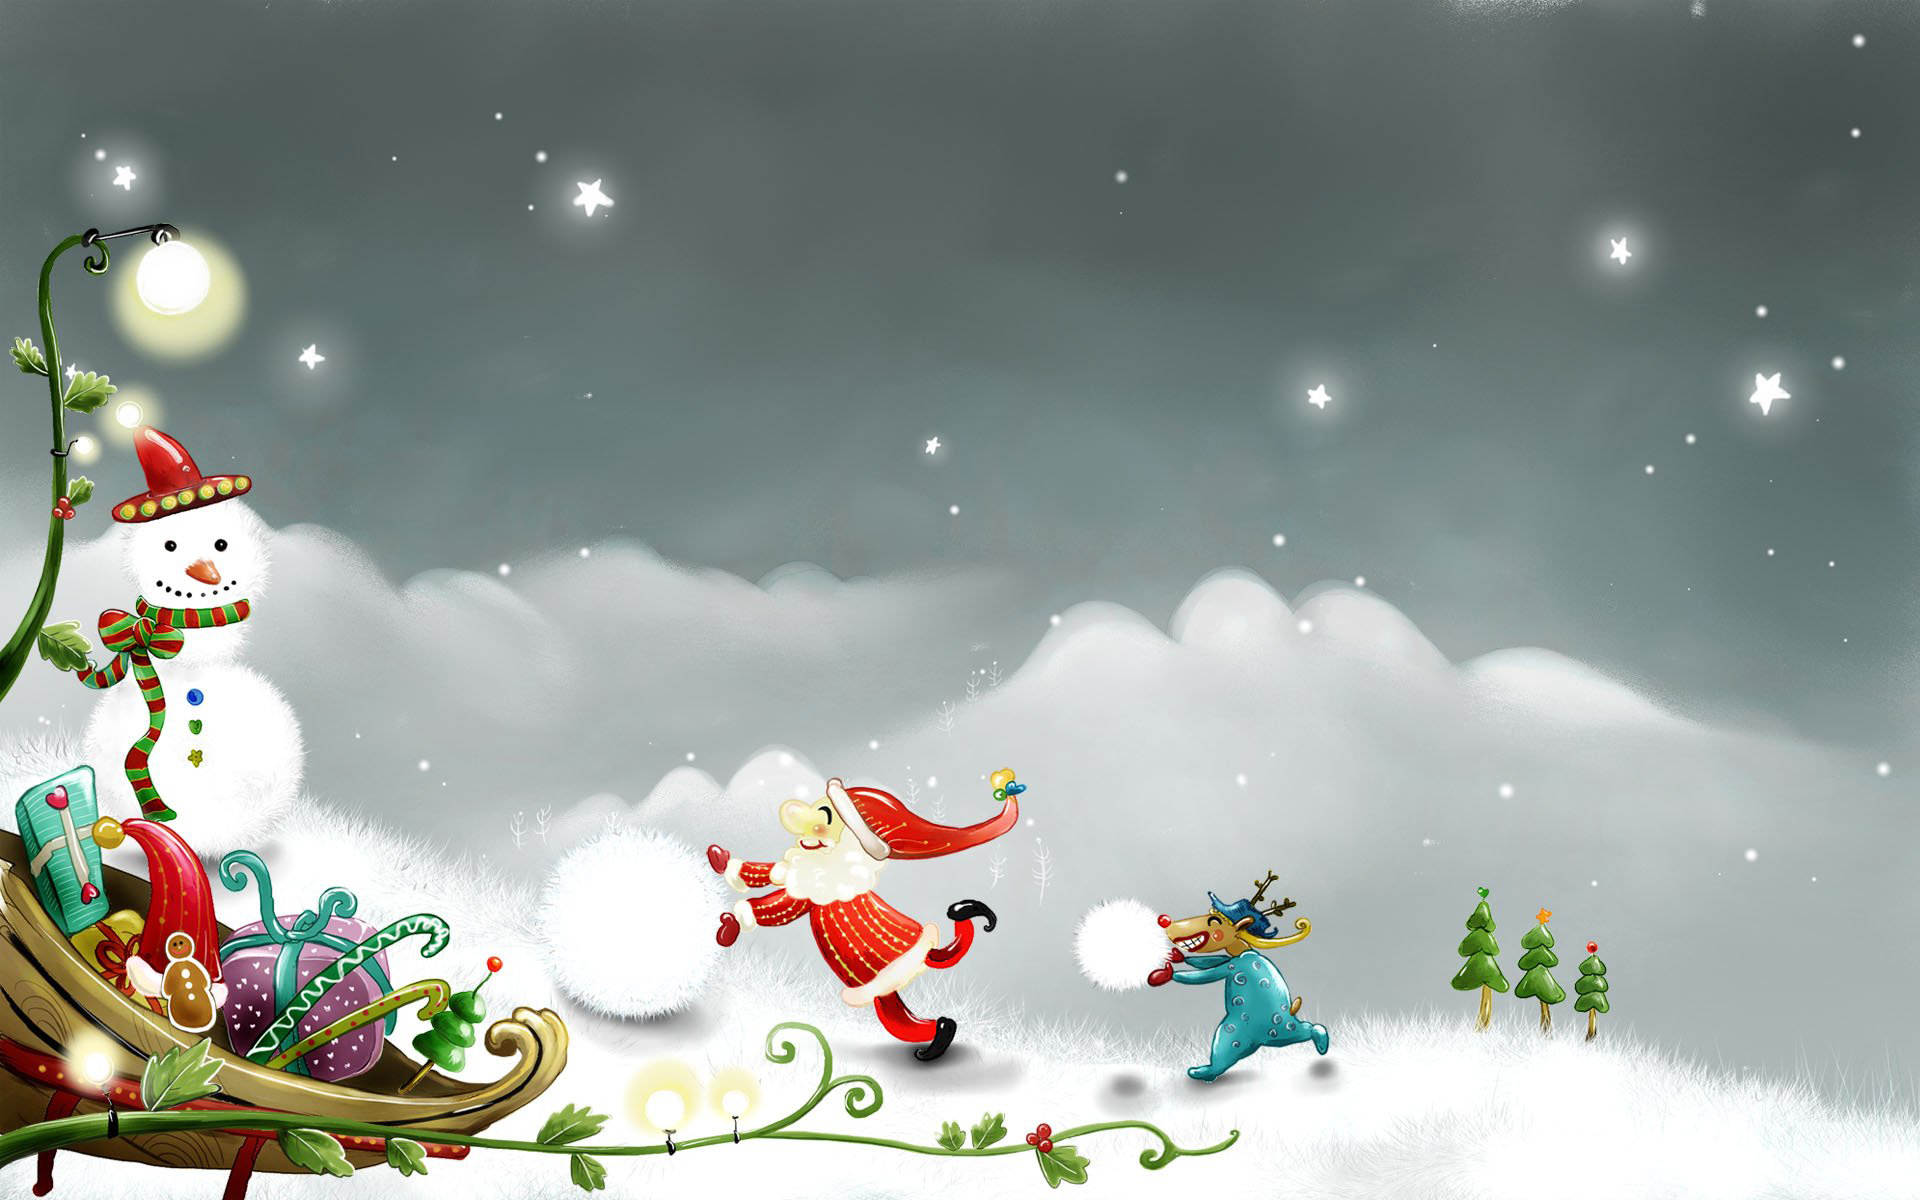 2015 merry Christmas desktop background - photos, images, pictures ...